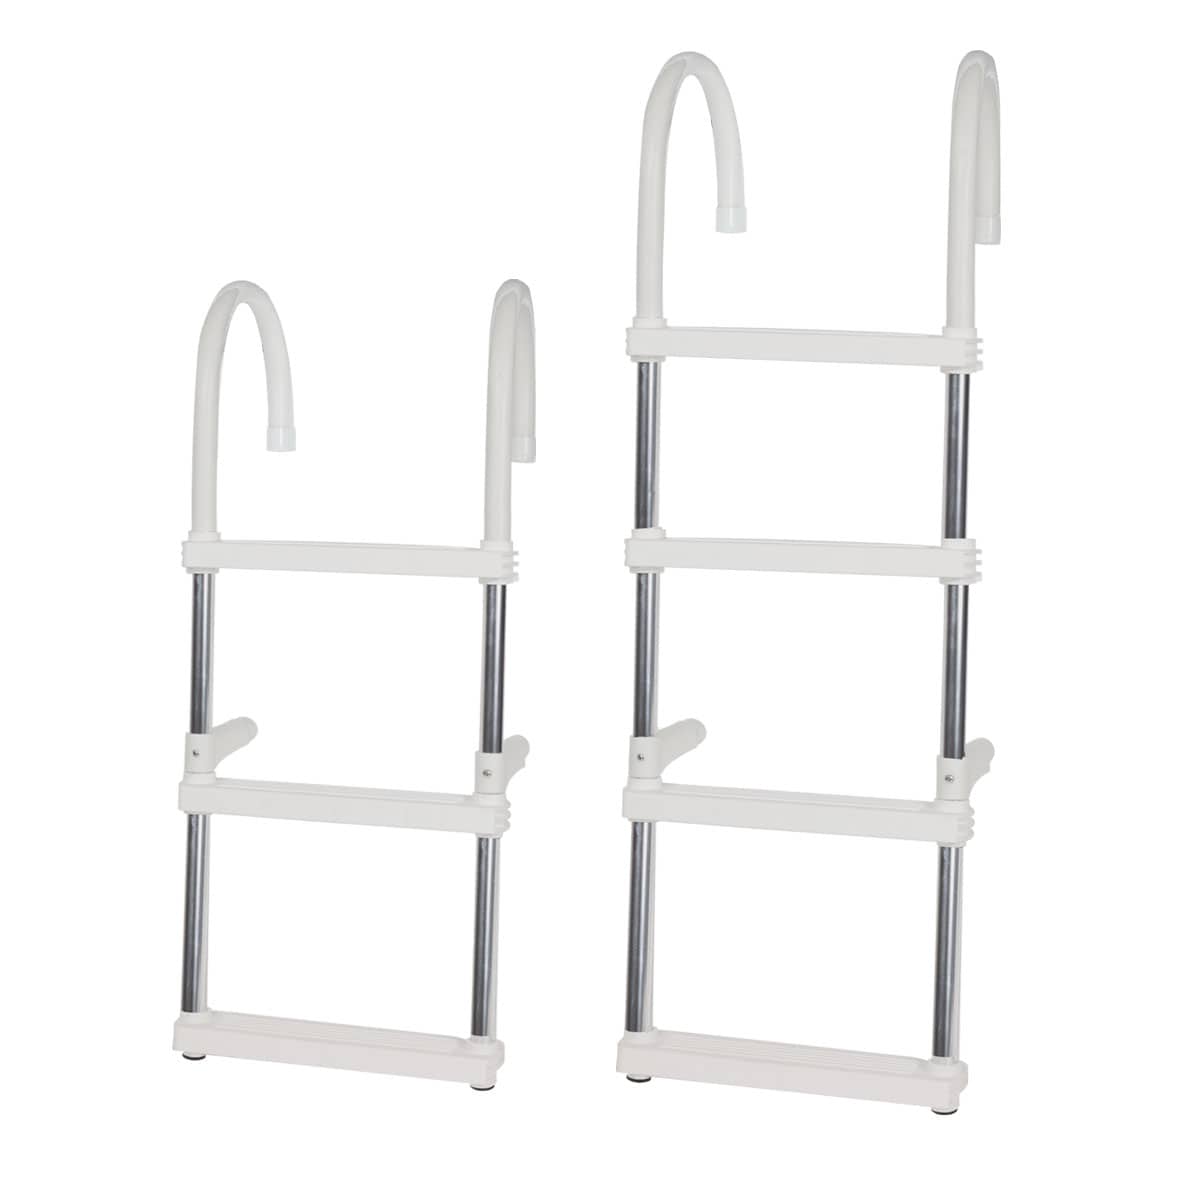 Images shows two white, three-step & four-step Oceansouth boat ladders made of stainless steel with stainless steel grab handles.